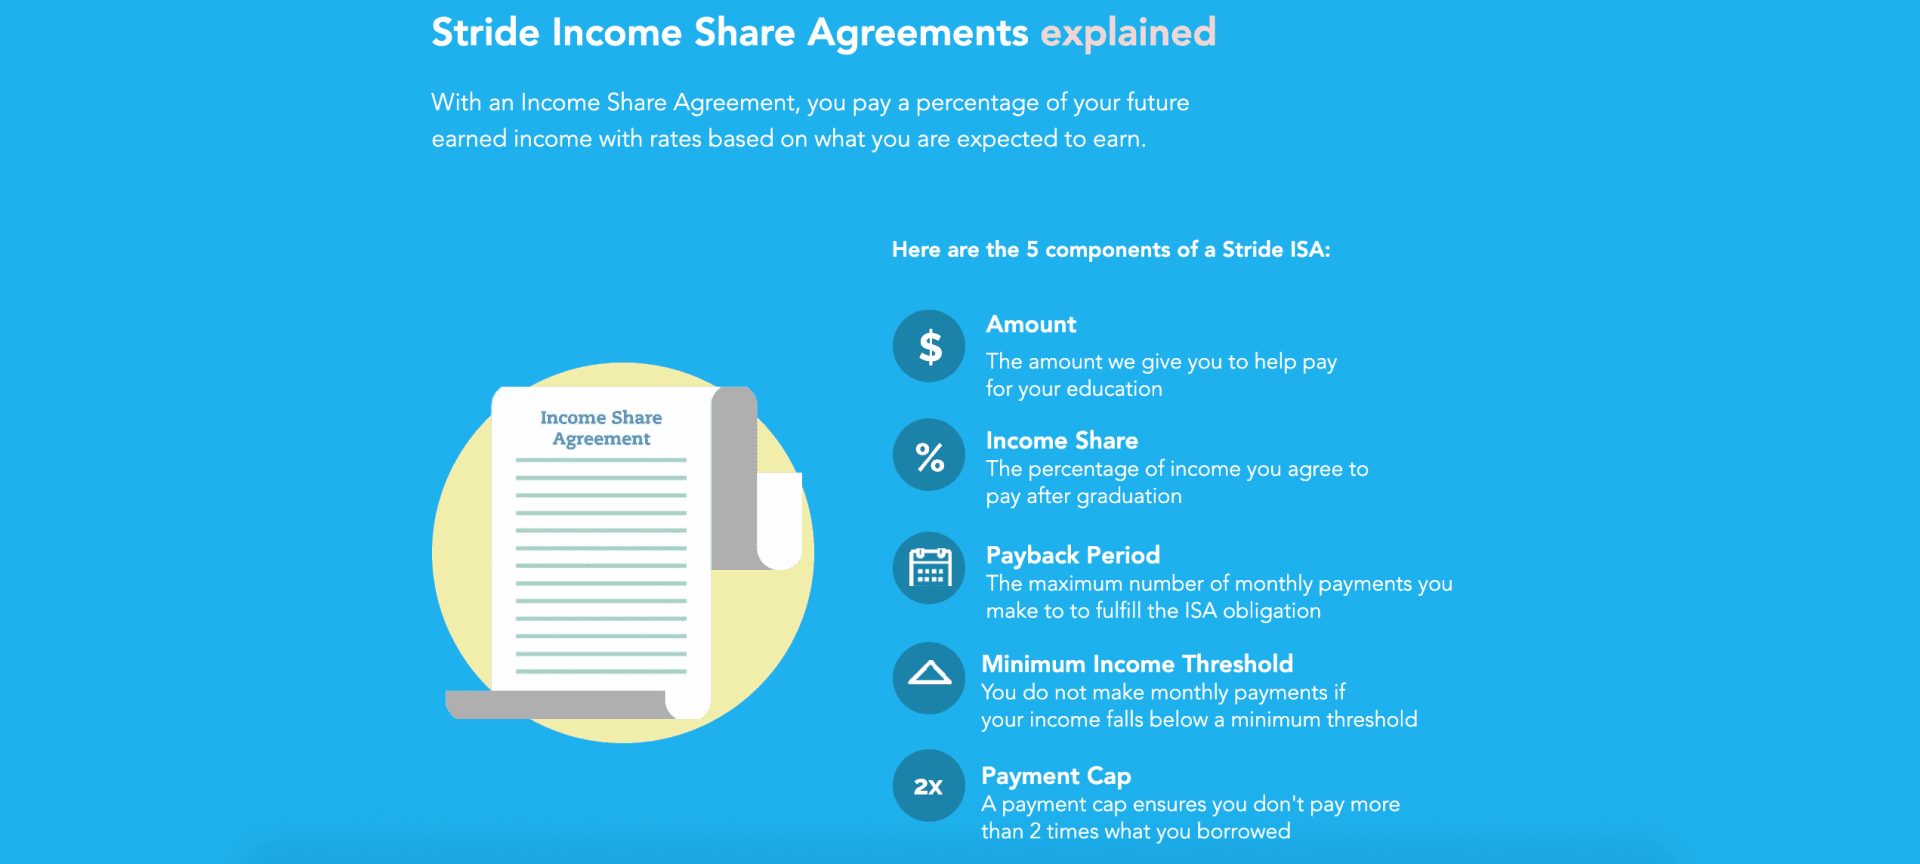 Stride Funding Review - ISA agreement